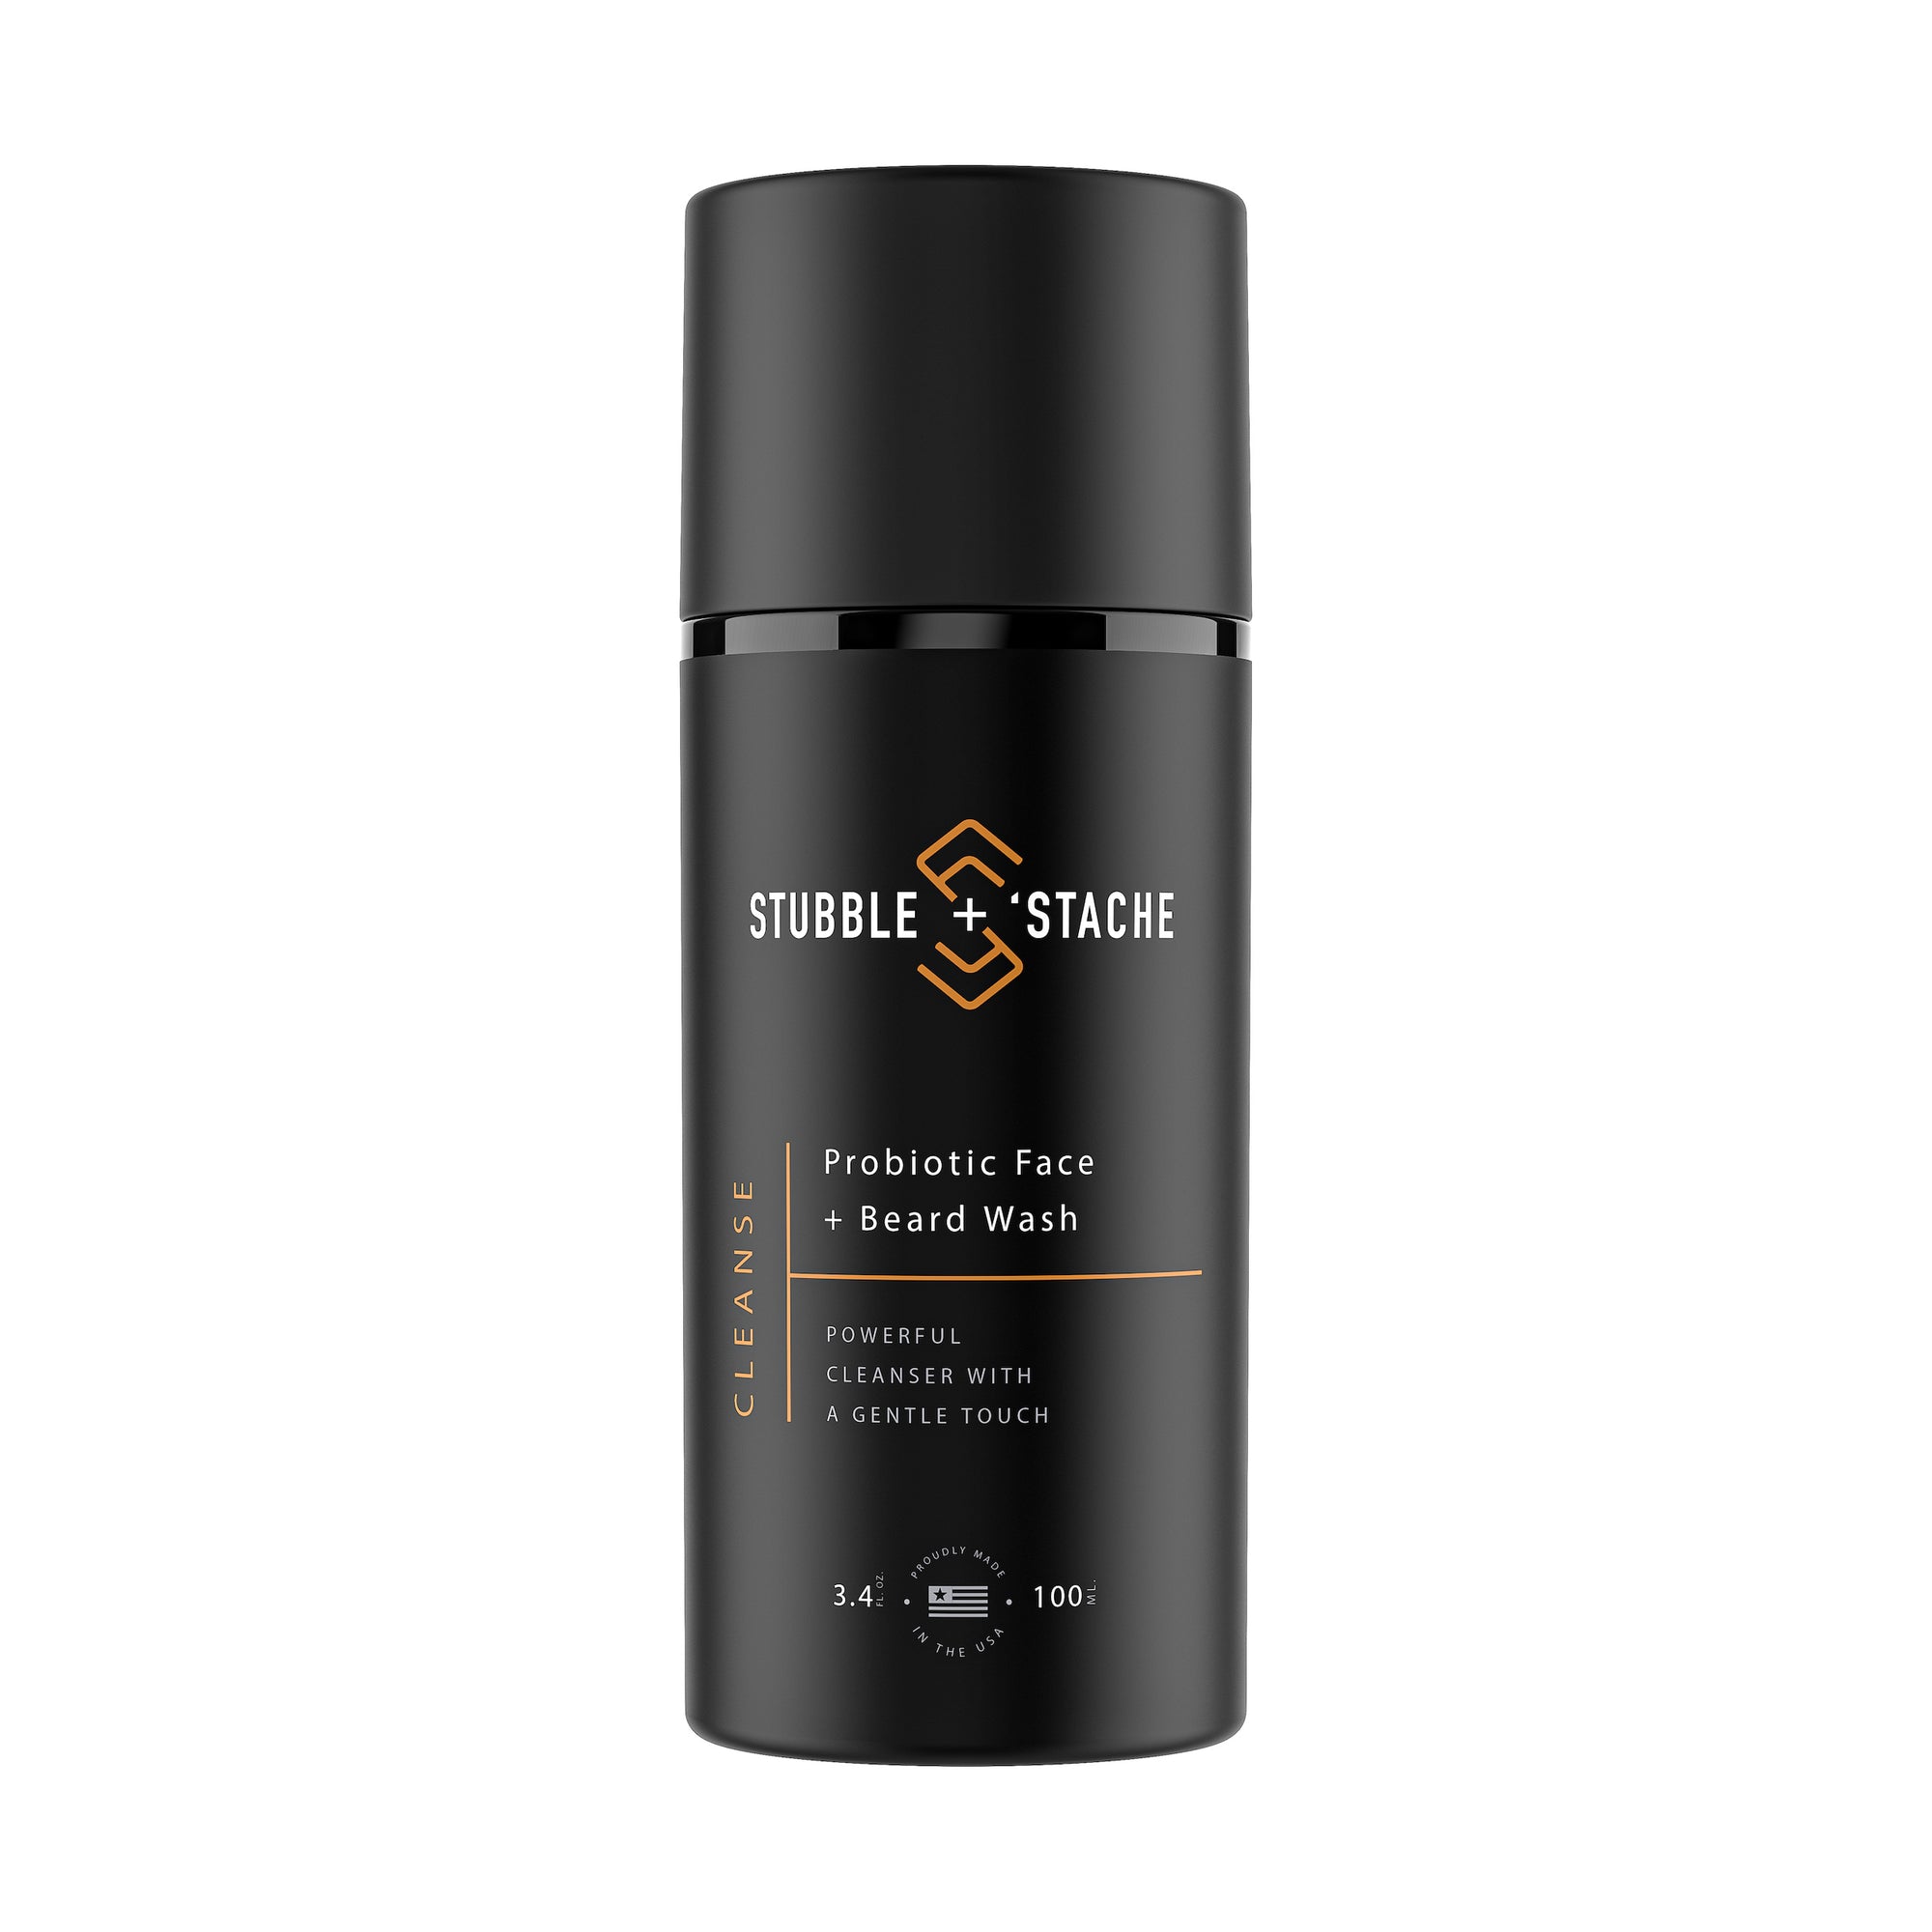 Cleanse Daily Face Wash and Beard Wash for men